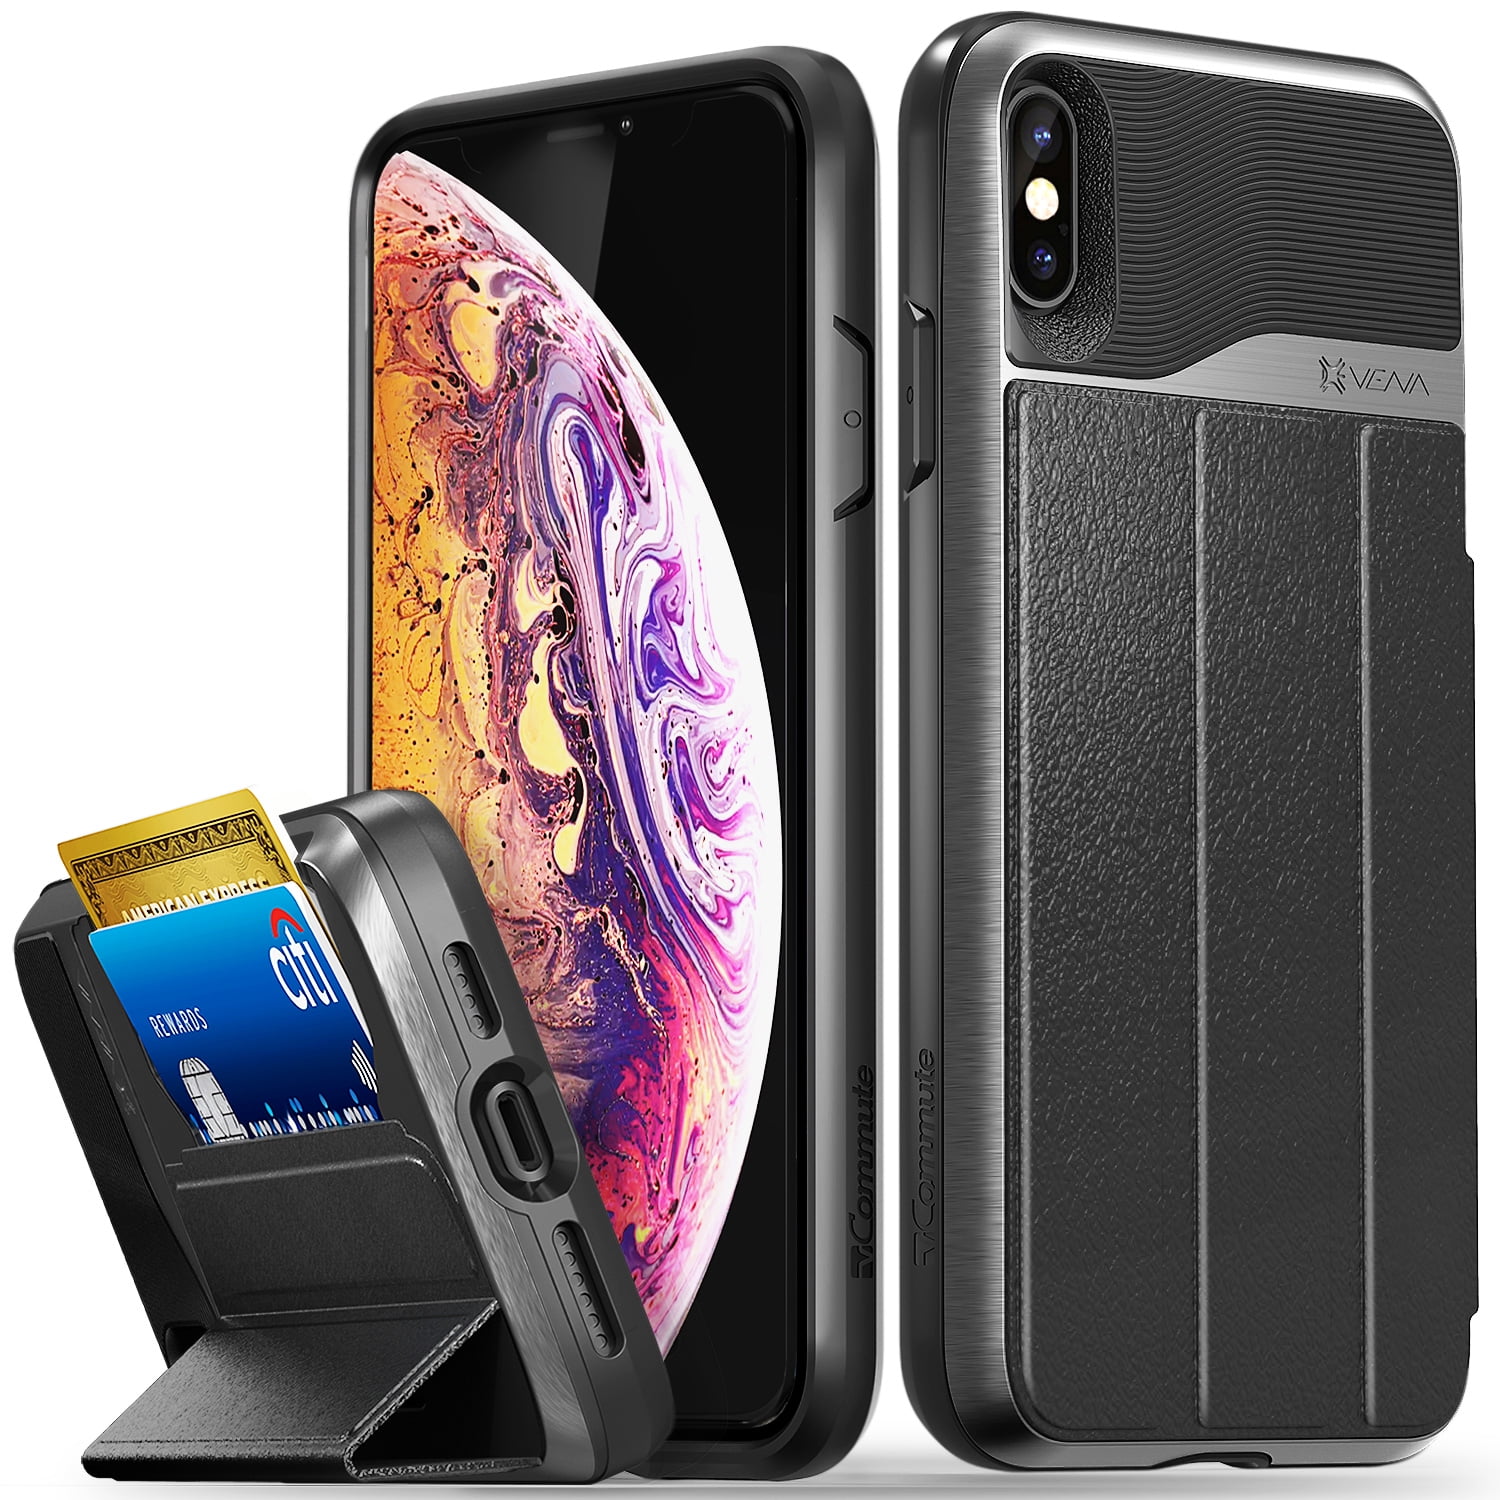 Flip Case for iPhone Xs Max Luxury Leather Bussiness Phone Case Cover for Bussiness Gifts with Free Waterproof Case